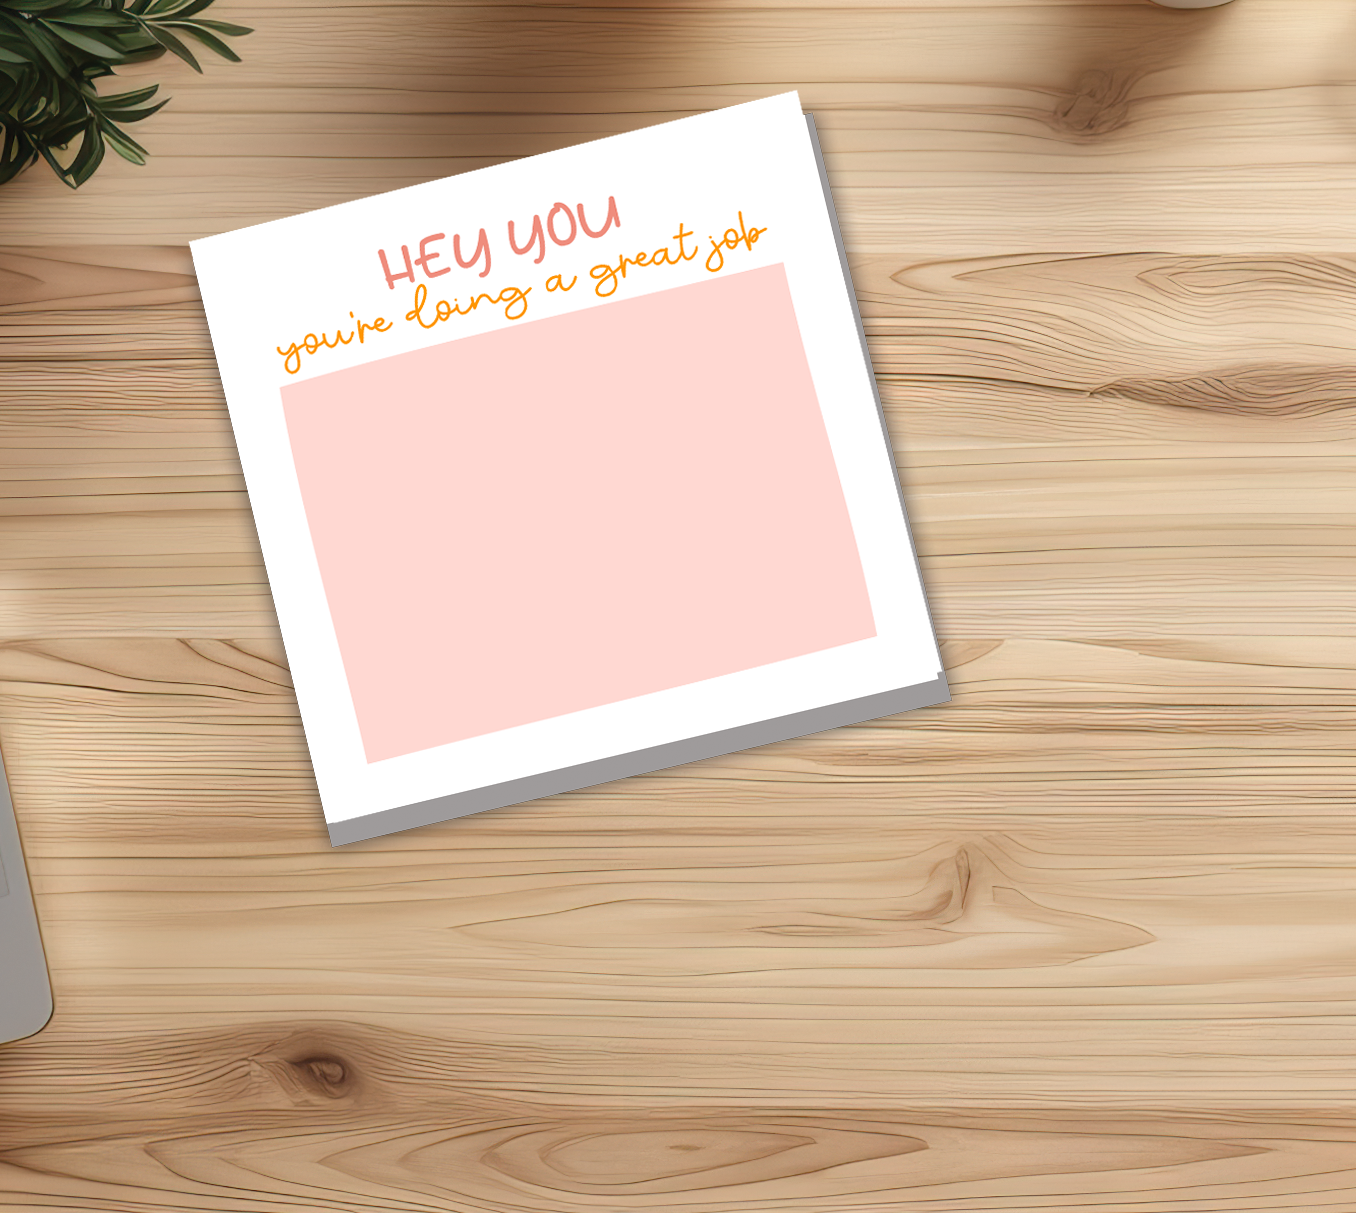 Motivational Sticky Notes - "Hey You, You're Doing a Great Job"